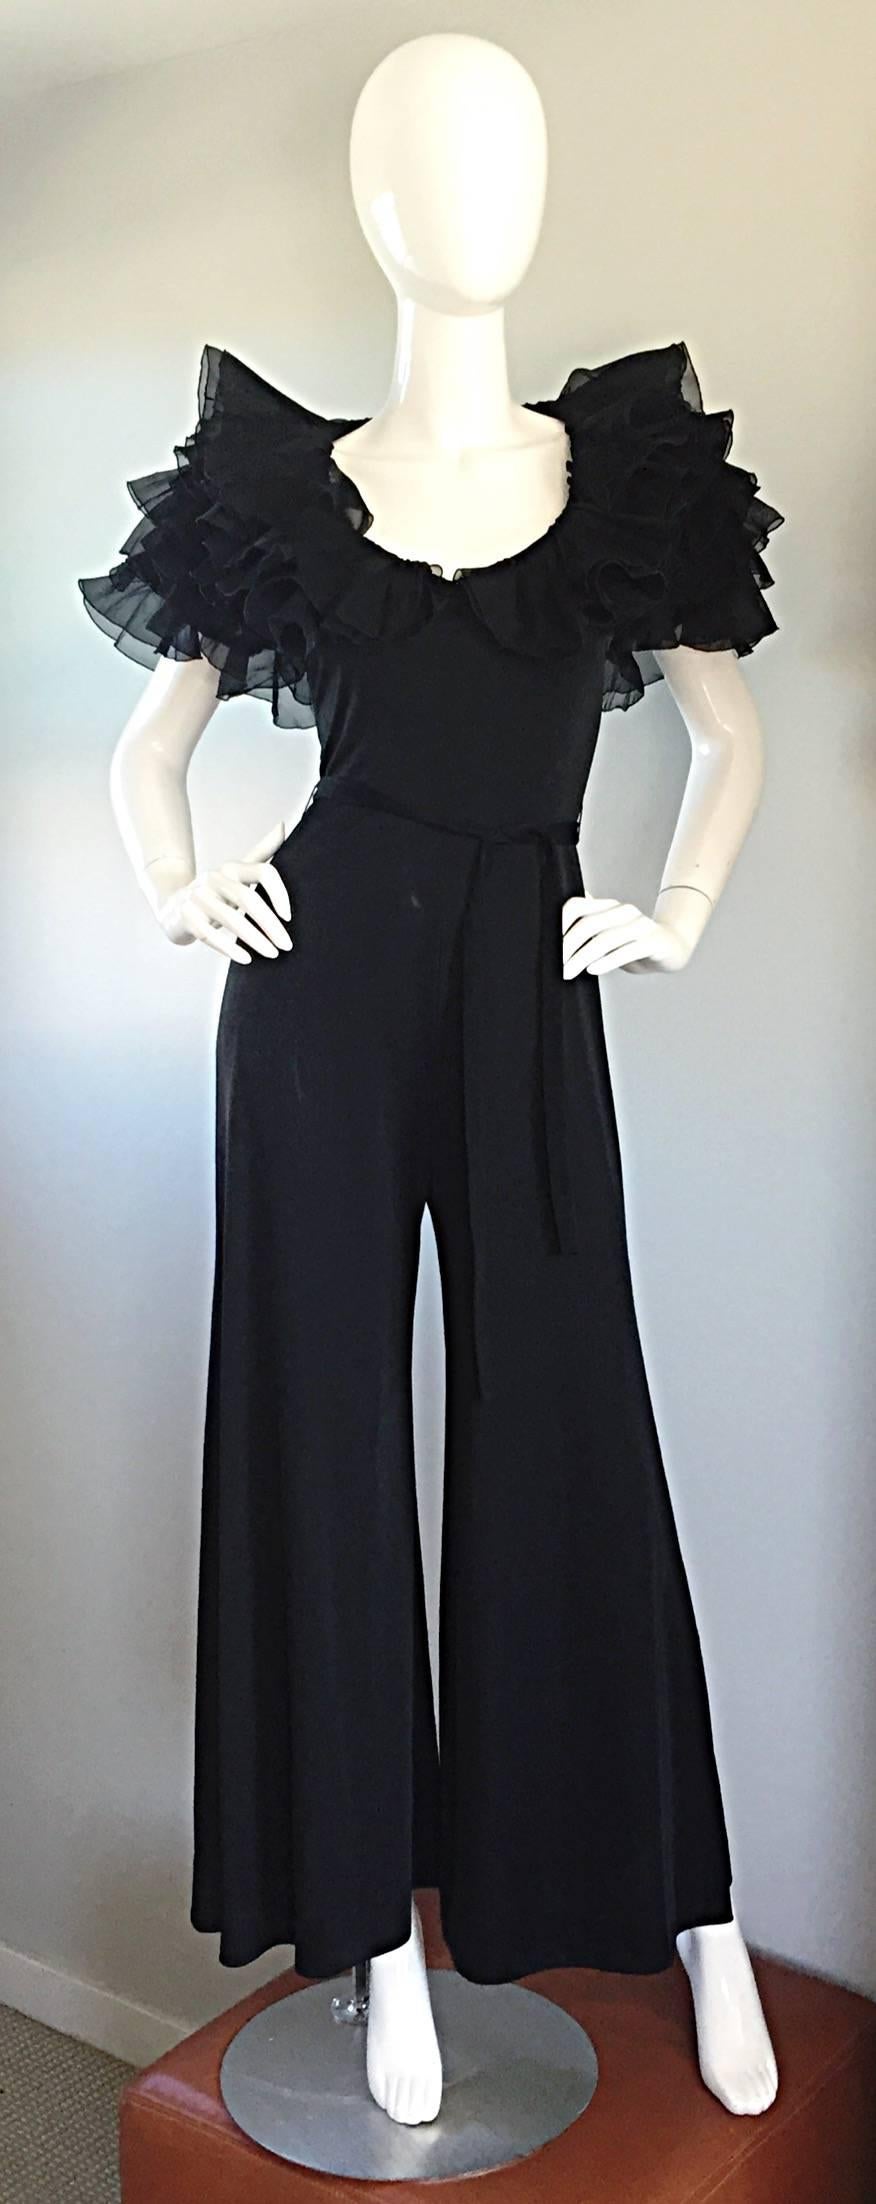 Exquisite late 70s / 1970s MIGNON black jersey jumpsuit! Features a figure flattering stretch to fit silk jersey material, with black silk chiffon tiered ruffle sleeves. Hidden zipper up the back, with hook-and-eye closure. Avant Garde flare, with